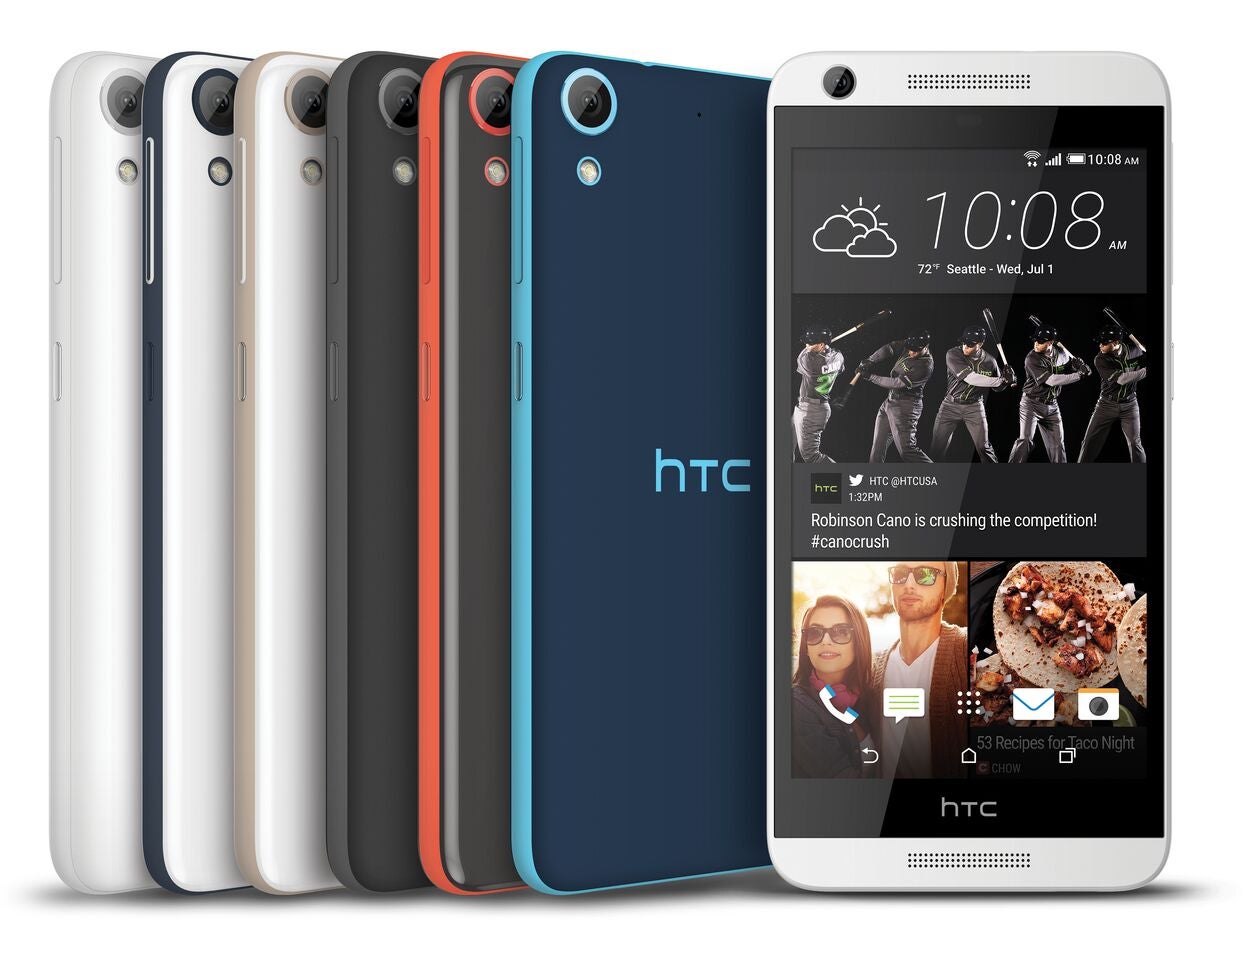 HTC refreshes affordable Desire series with four new LTE phones: HTC Desire 626, 626s, 526 and 520 go official